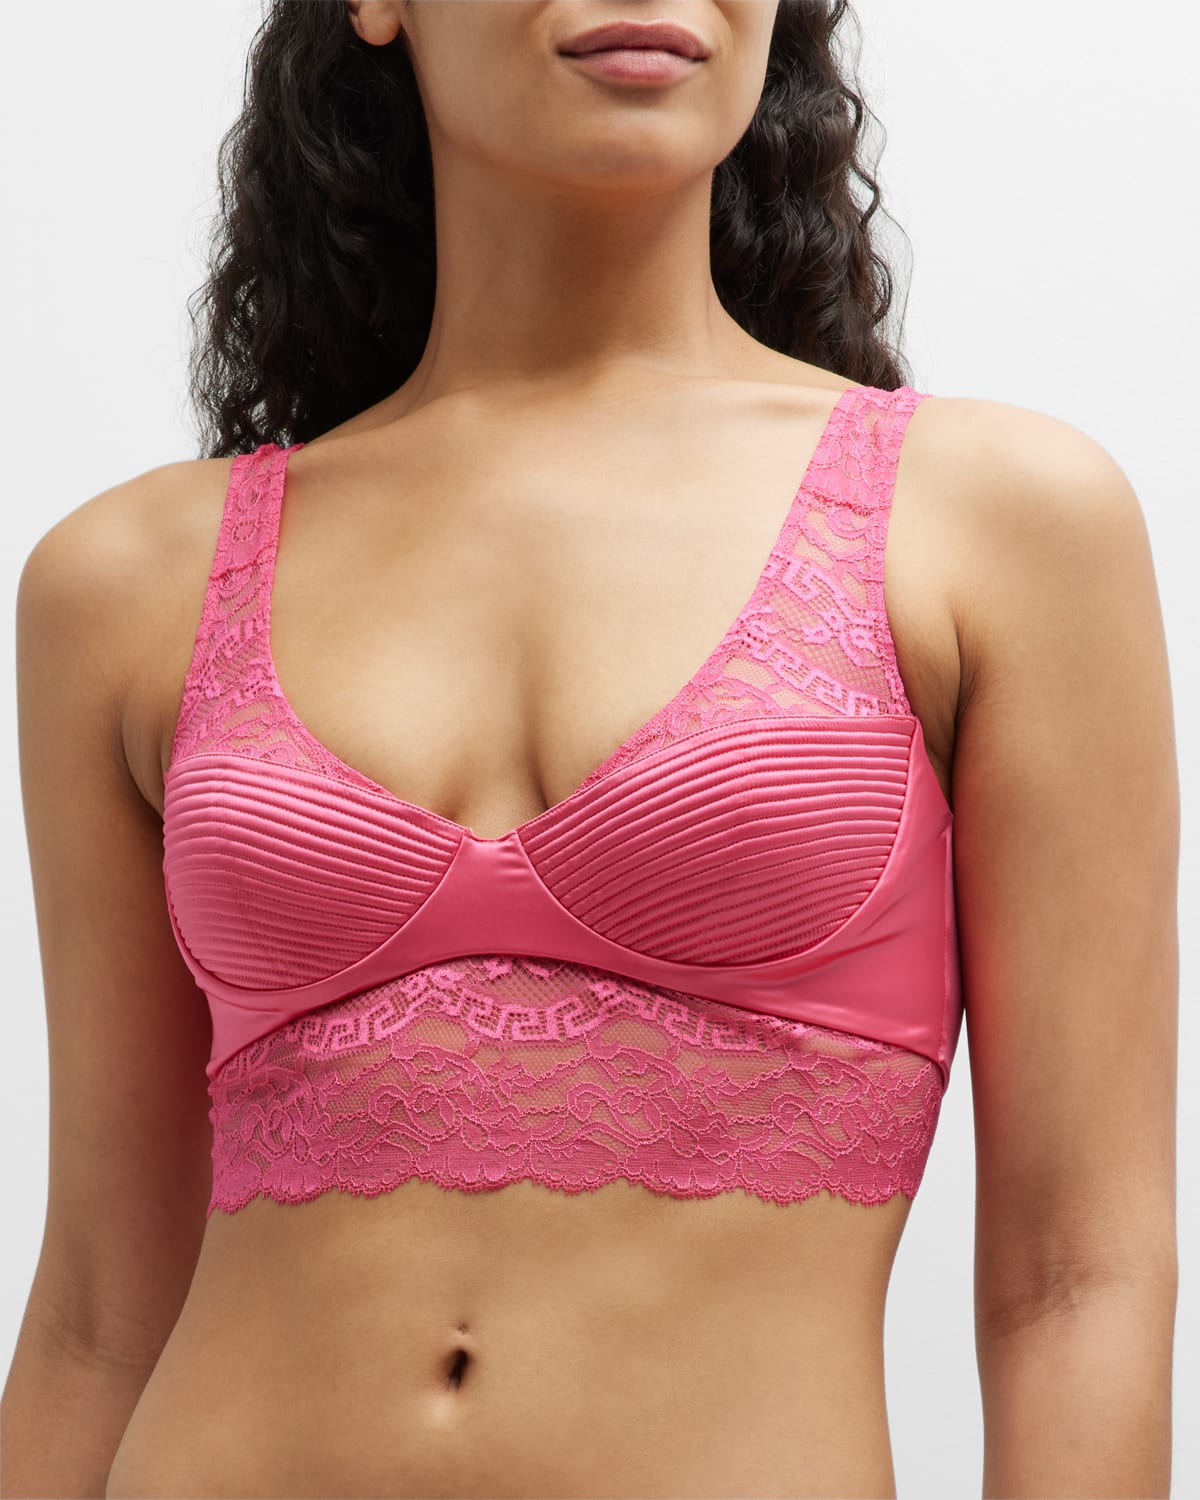 Versace Bralette Top With Lace Details in Purple